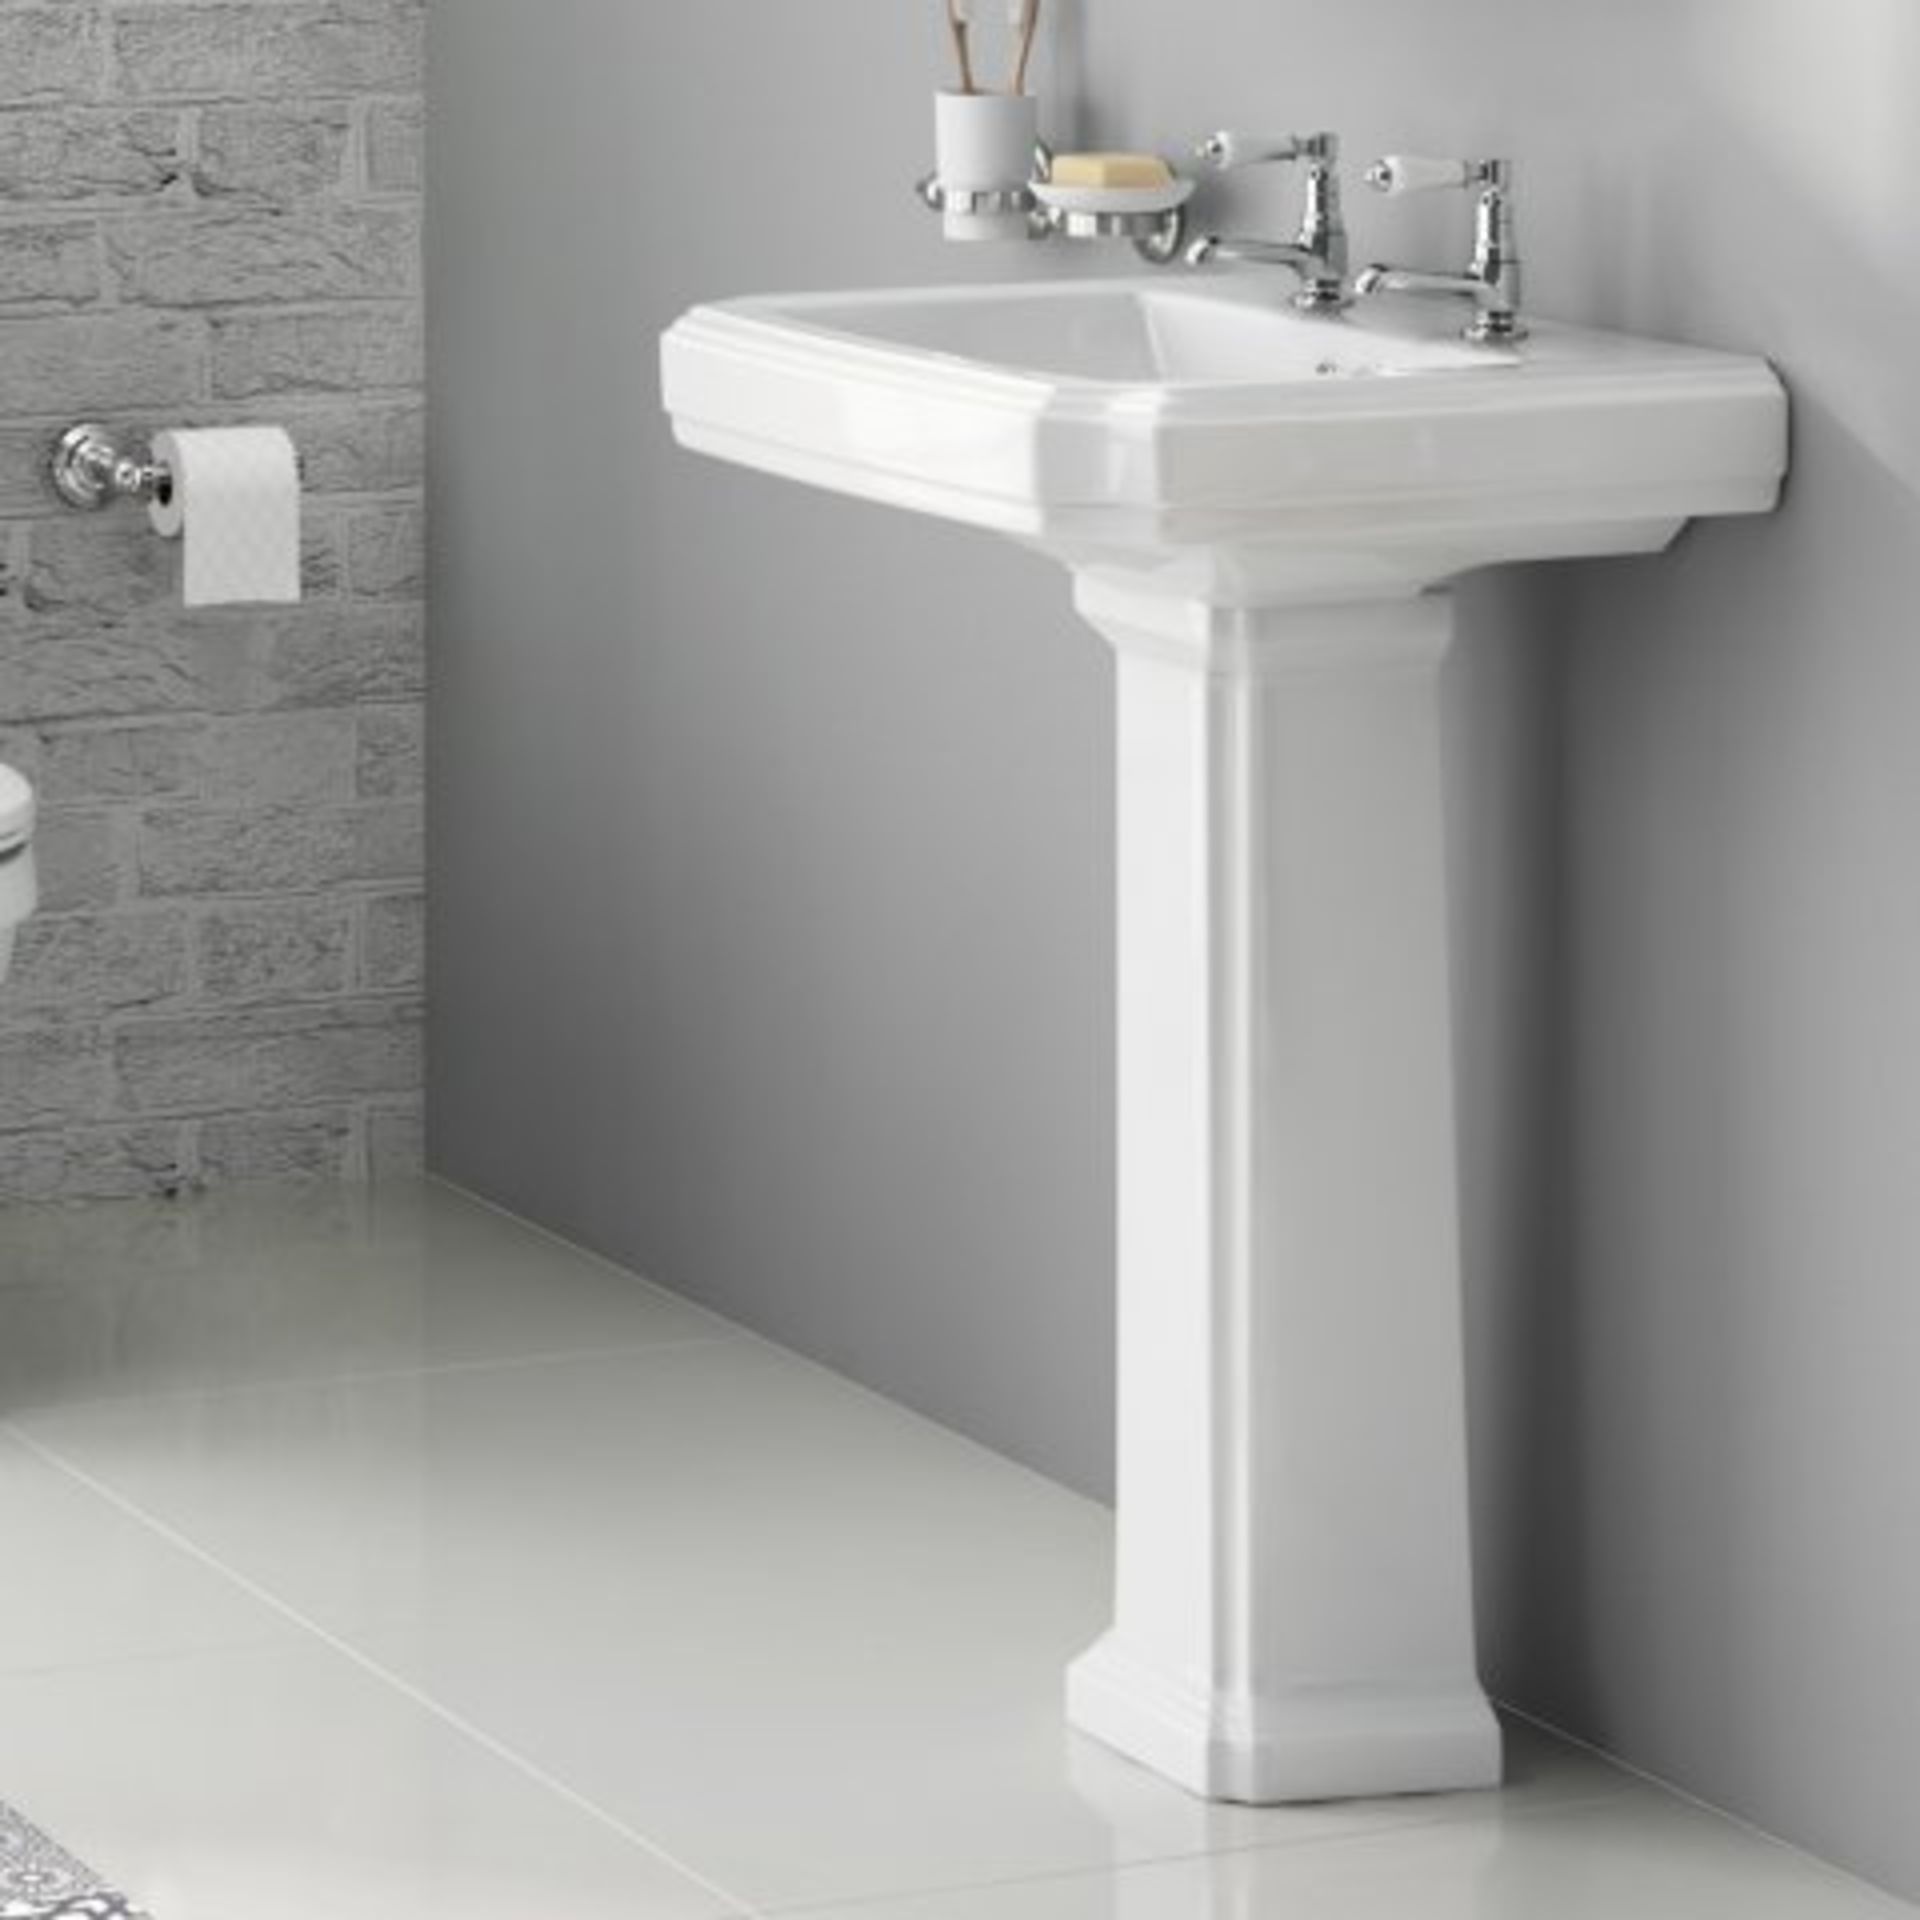 (M7) Georgia II Traditional Basin & Pedestal - Double Tap Hole. RRP £199.99. This elegant basin is